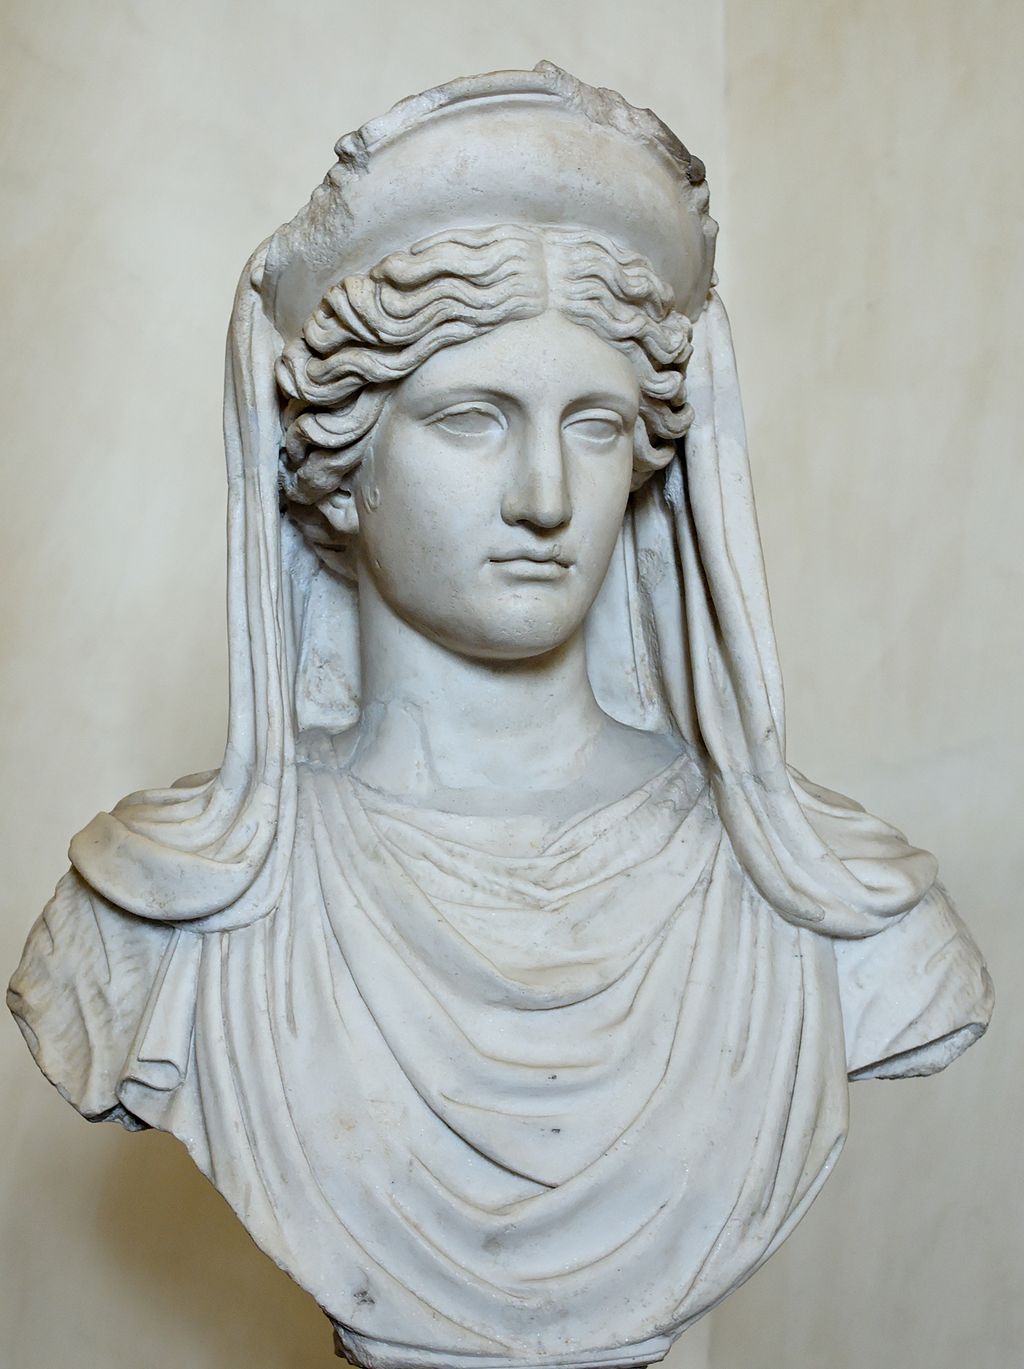 Which Olympian was the mother of Persephone?